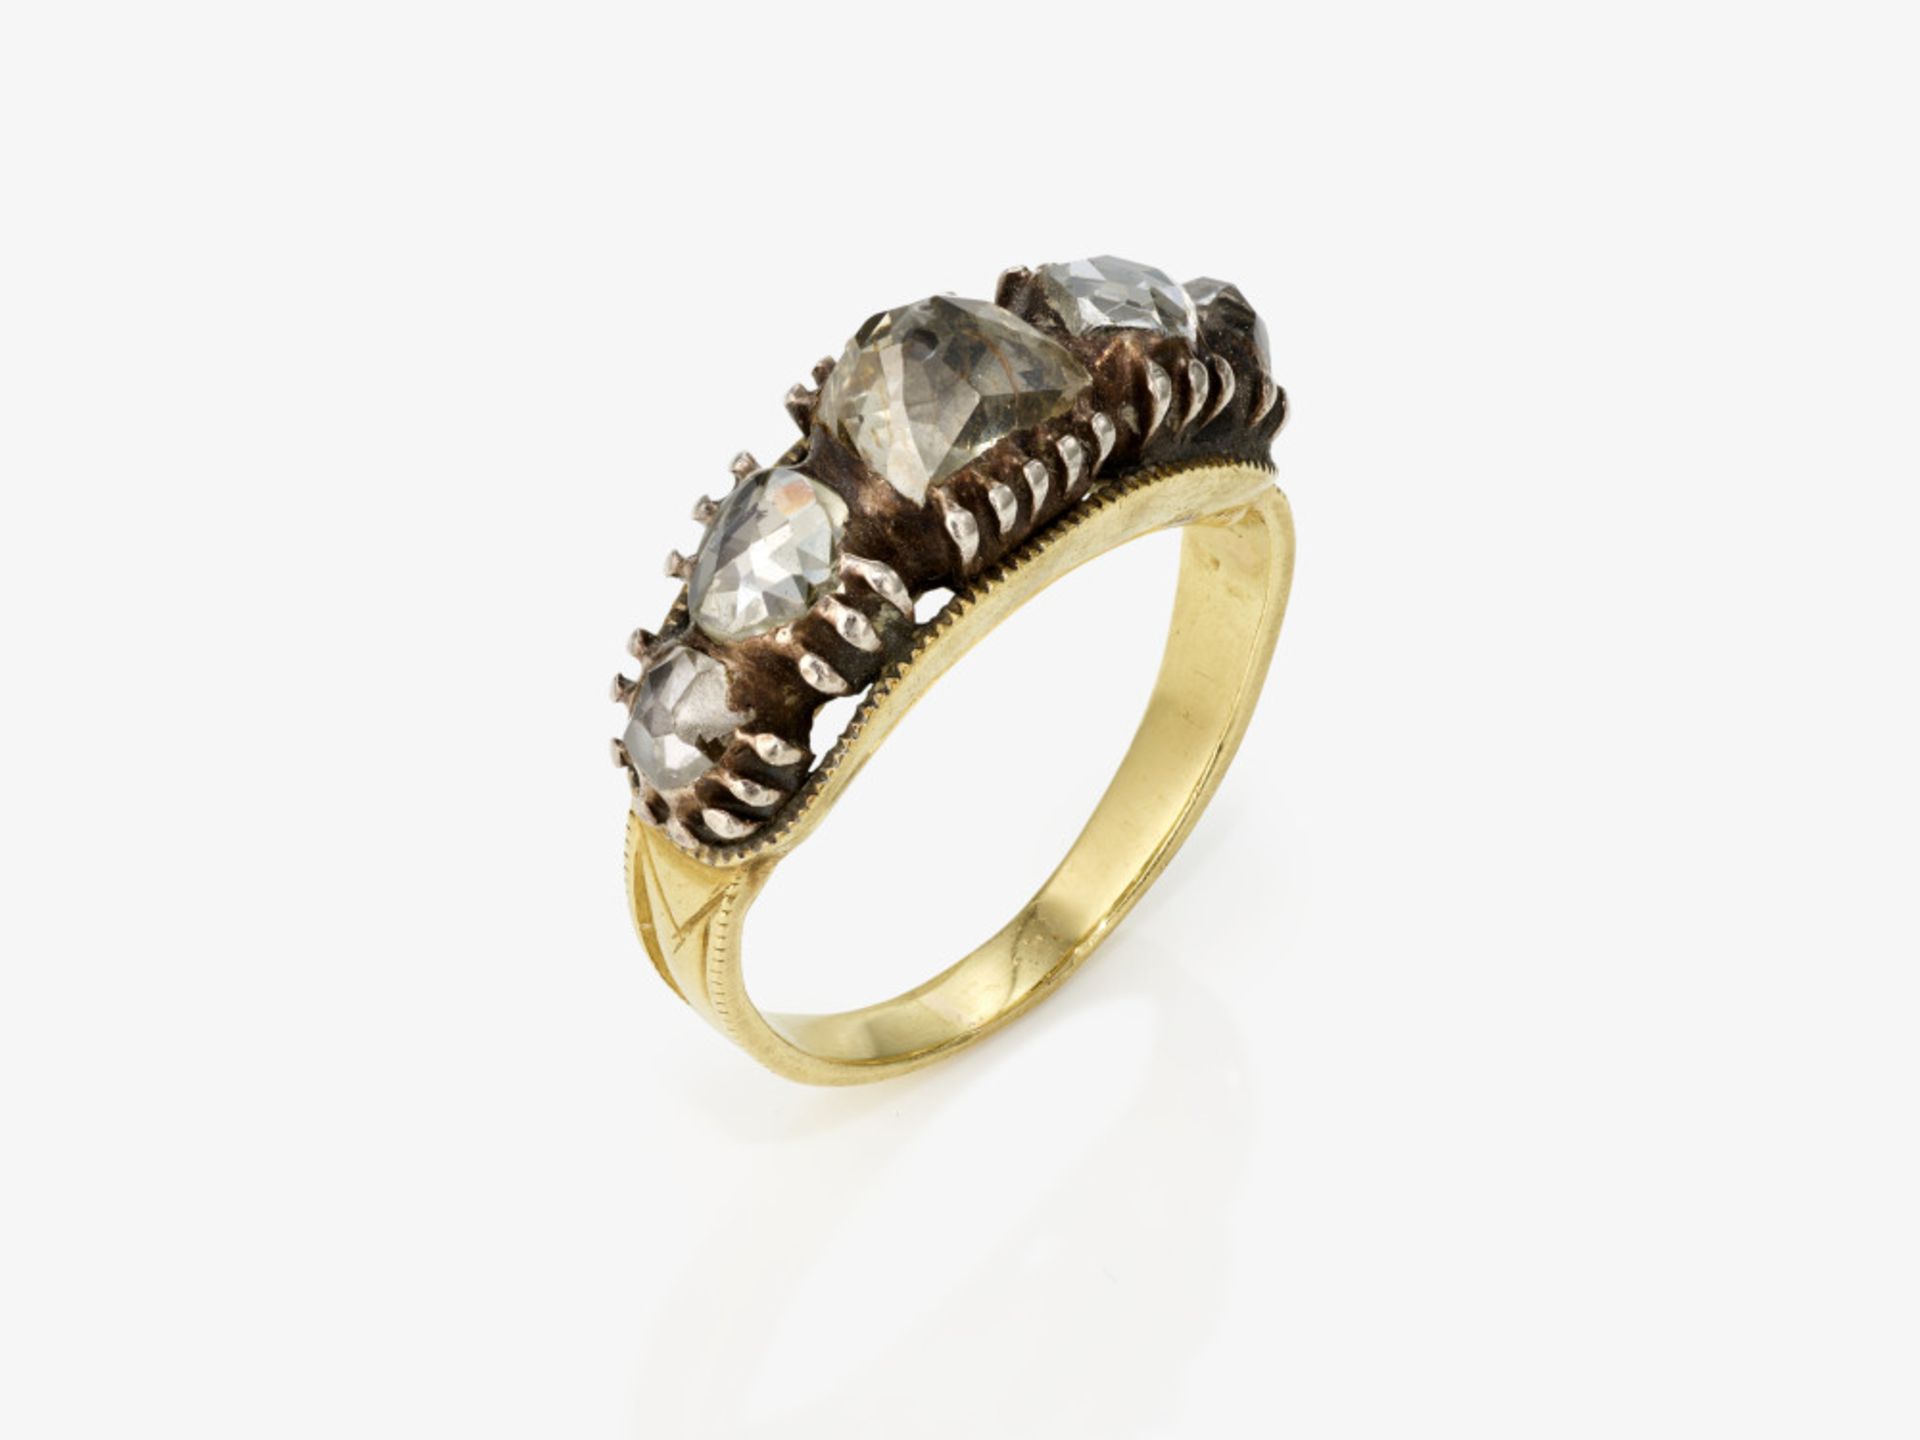 A Rivière ring with five diamonds - Setting: 1930s, the diamonds were cut in the 17th and 18th centu